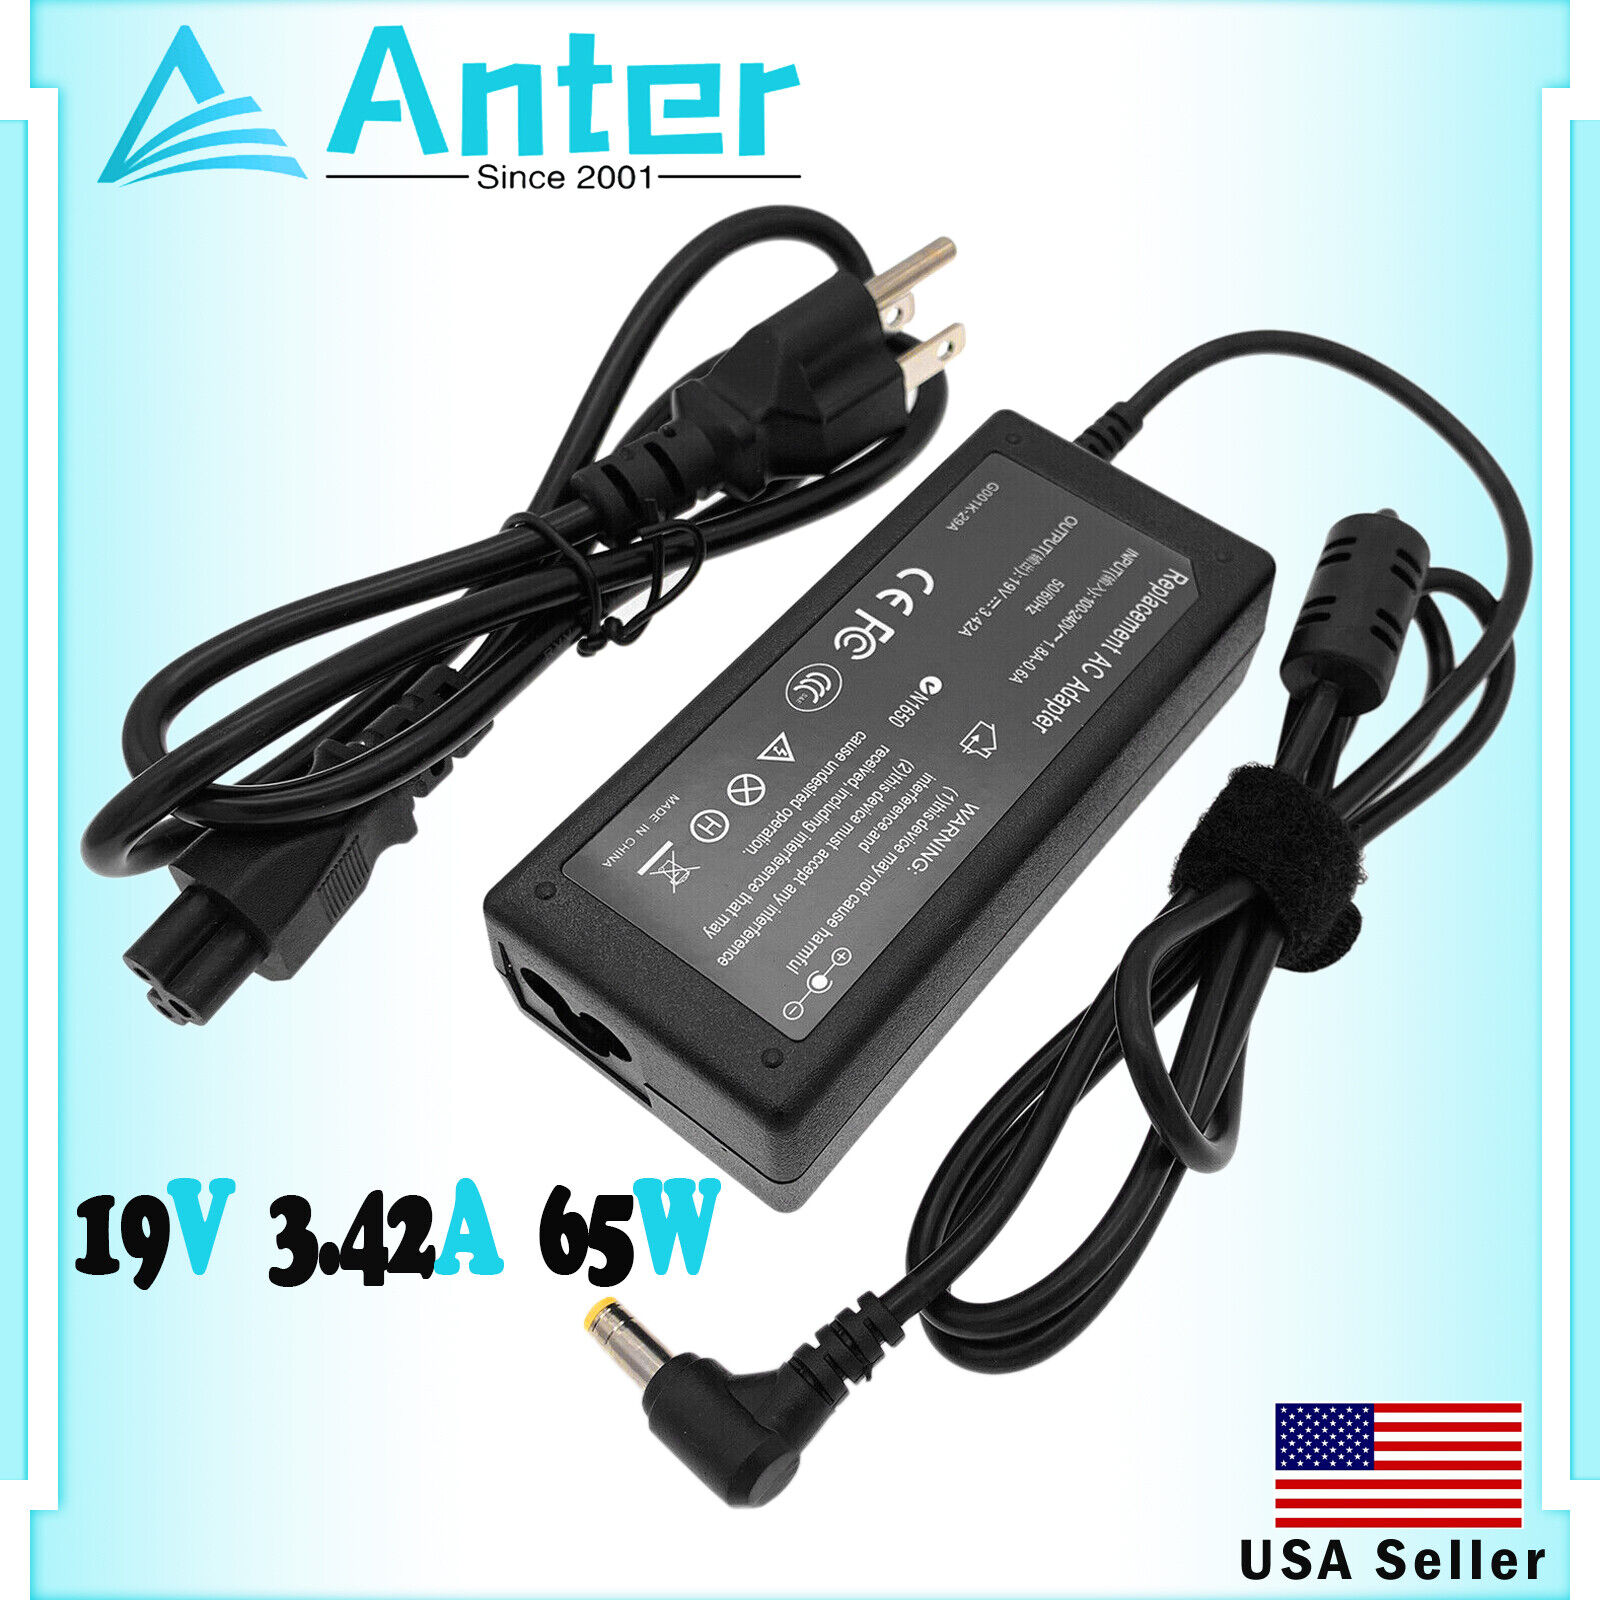 AC Adapter Charger For Toshiba Satellite C655D-S5509 C655D-S5518 C655D-S5531